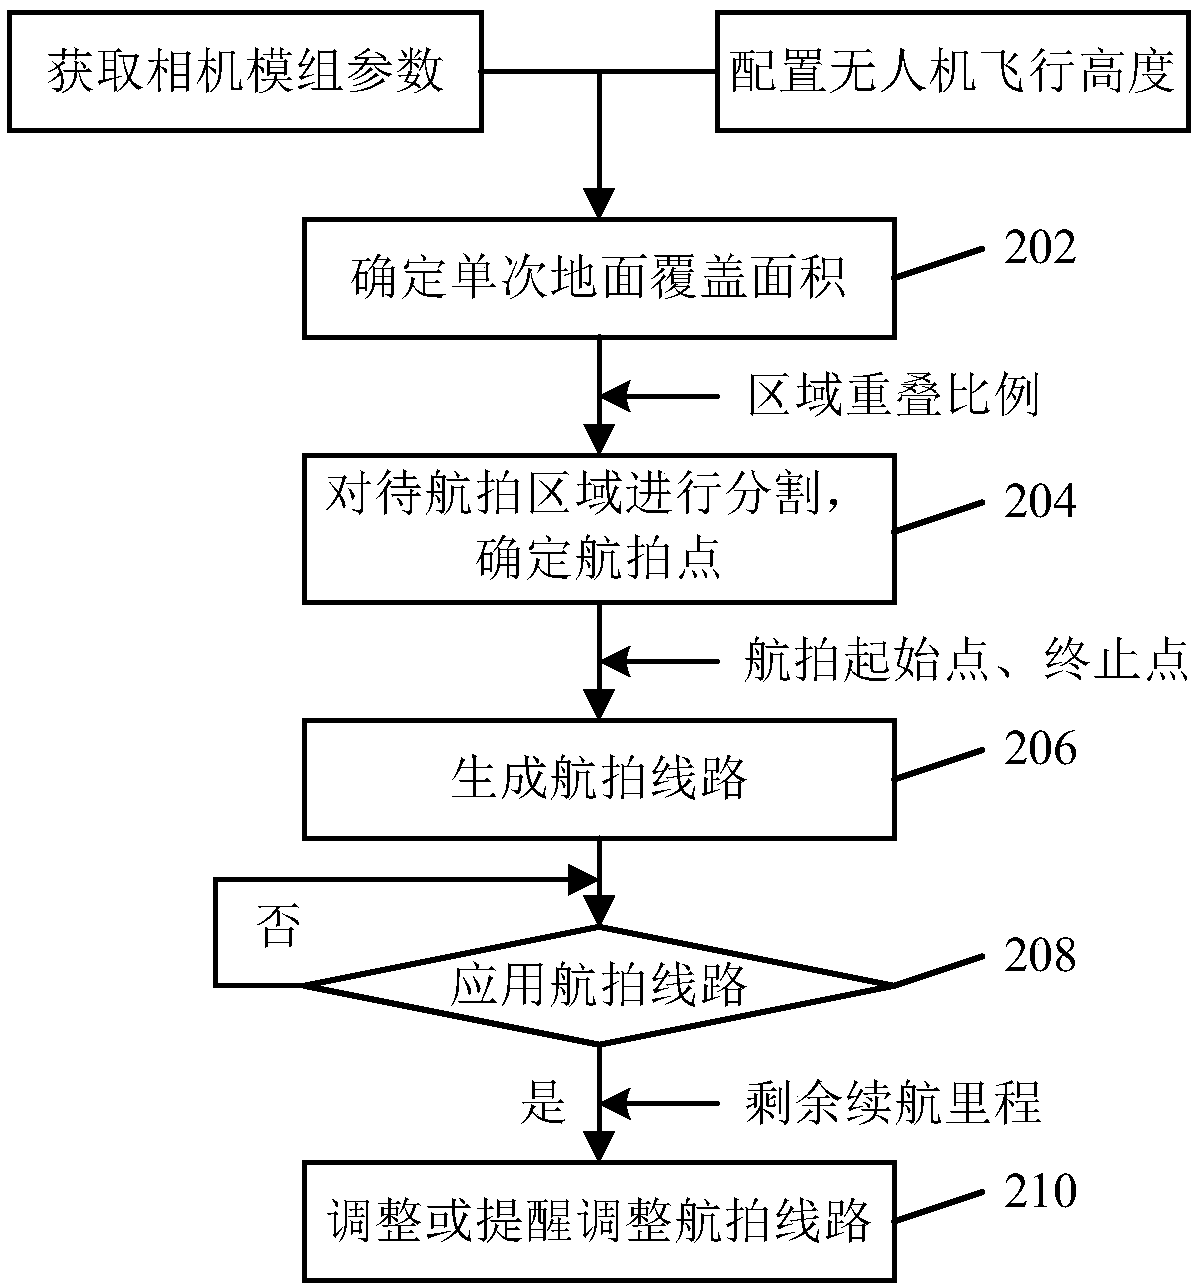 Image capturing method and device, drone